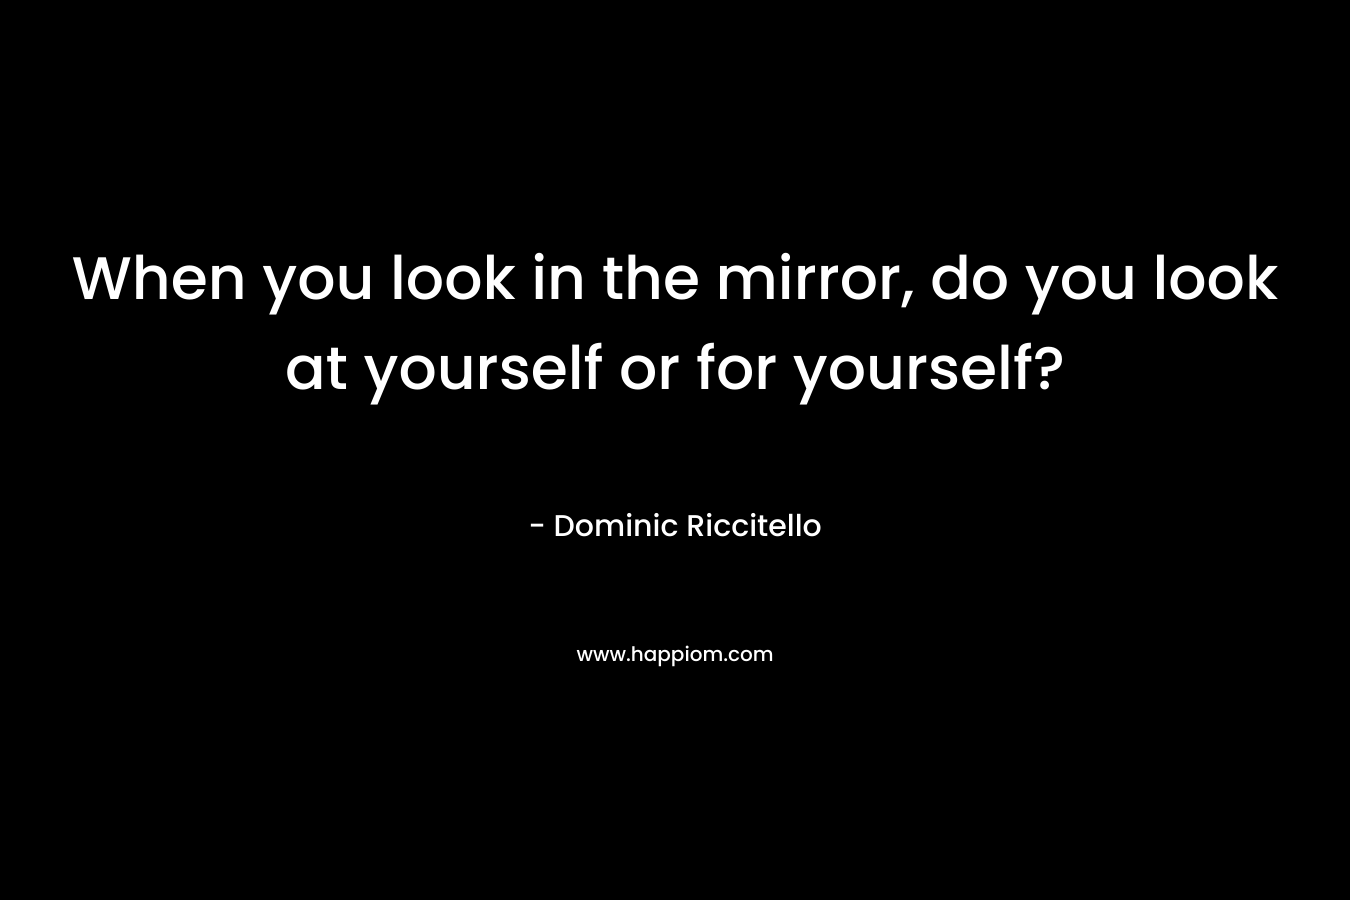 When you look in the mirror, do you look at yourself or for yourself?